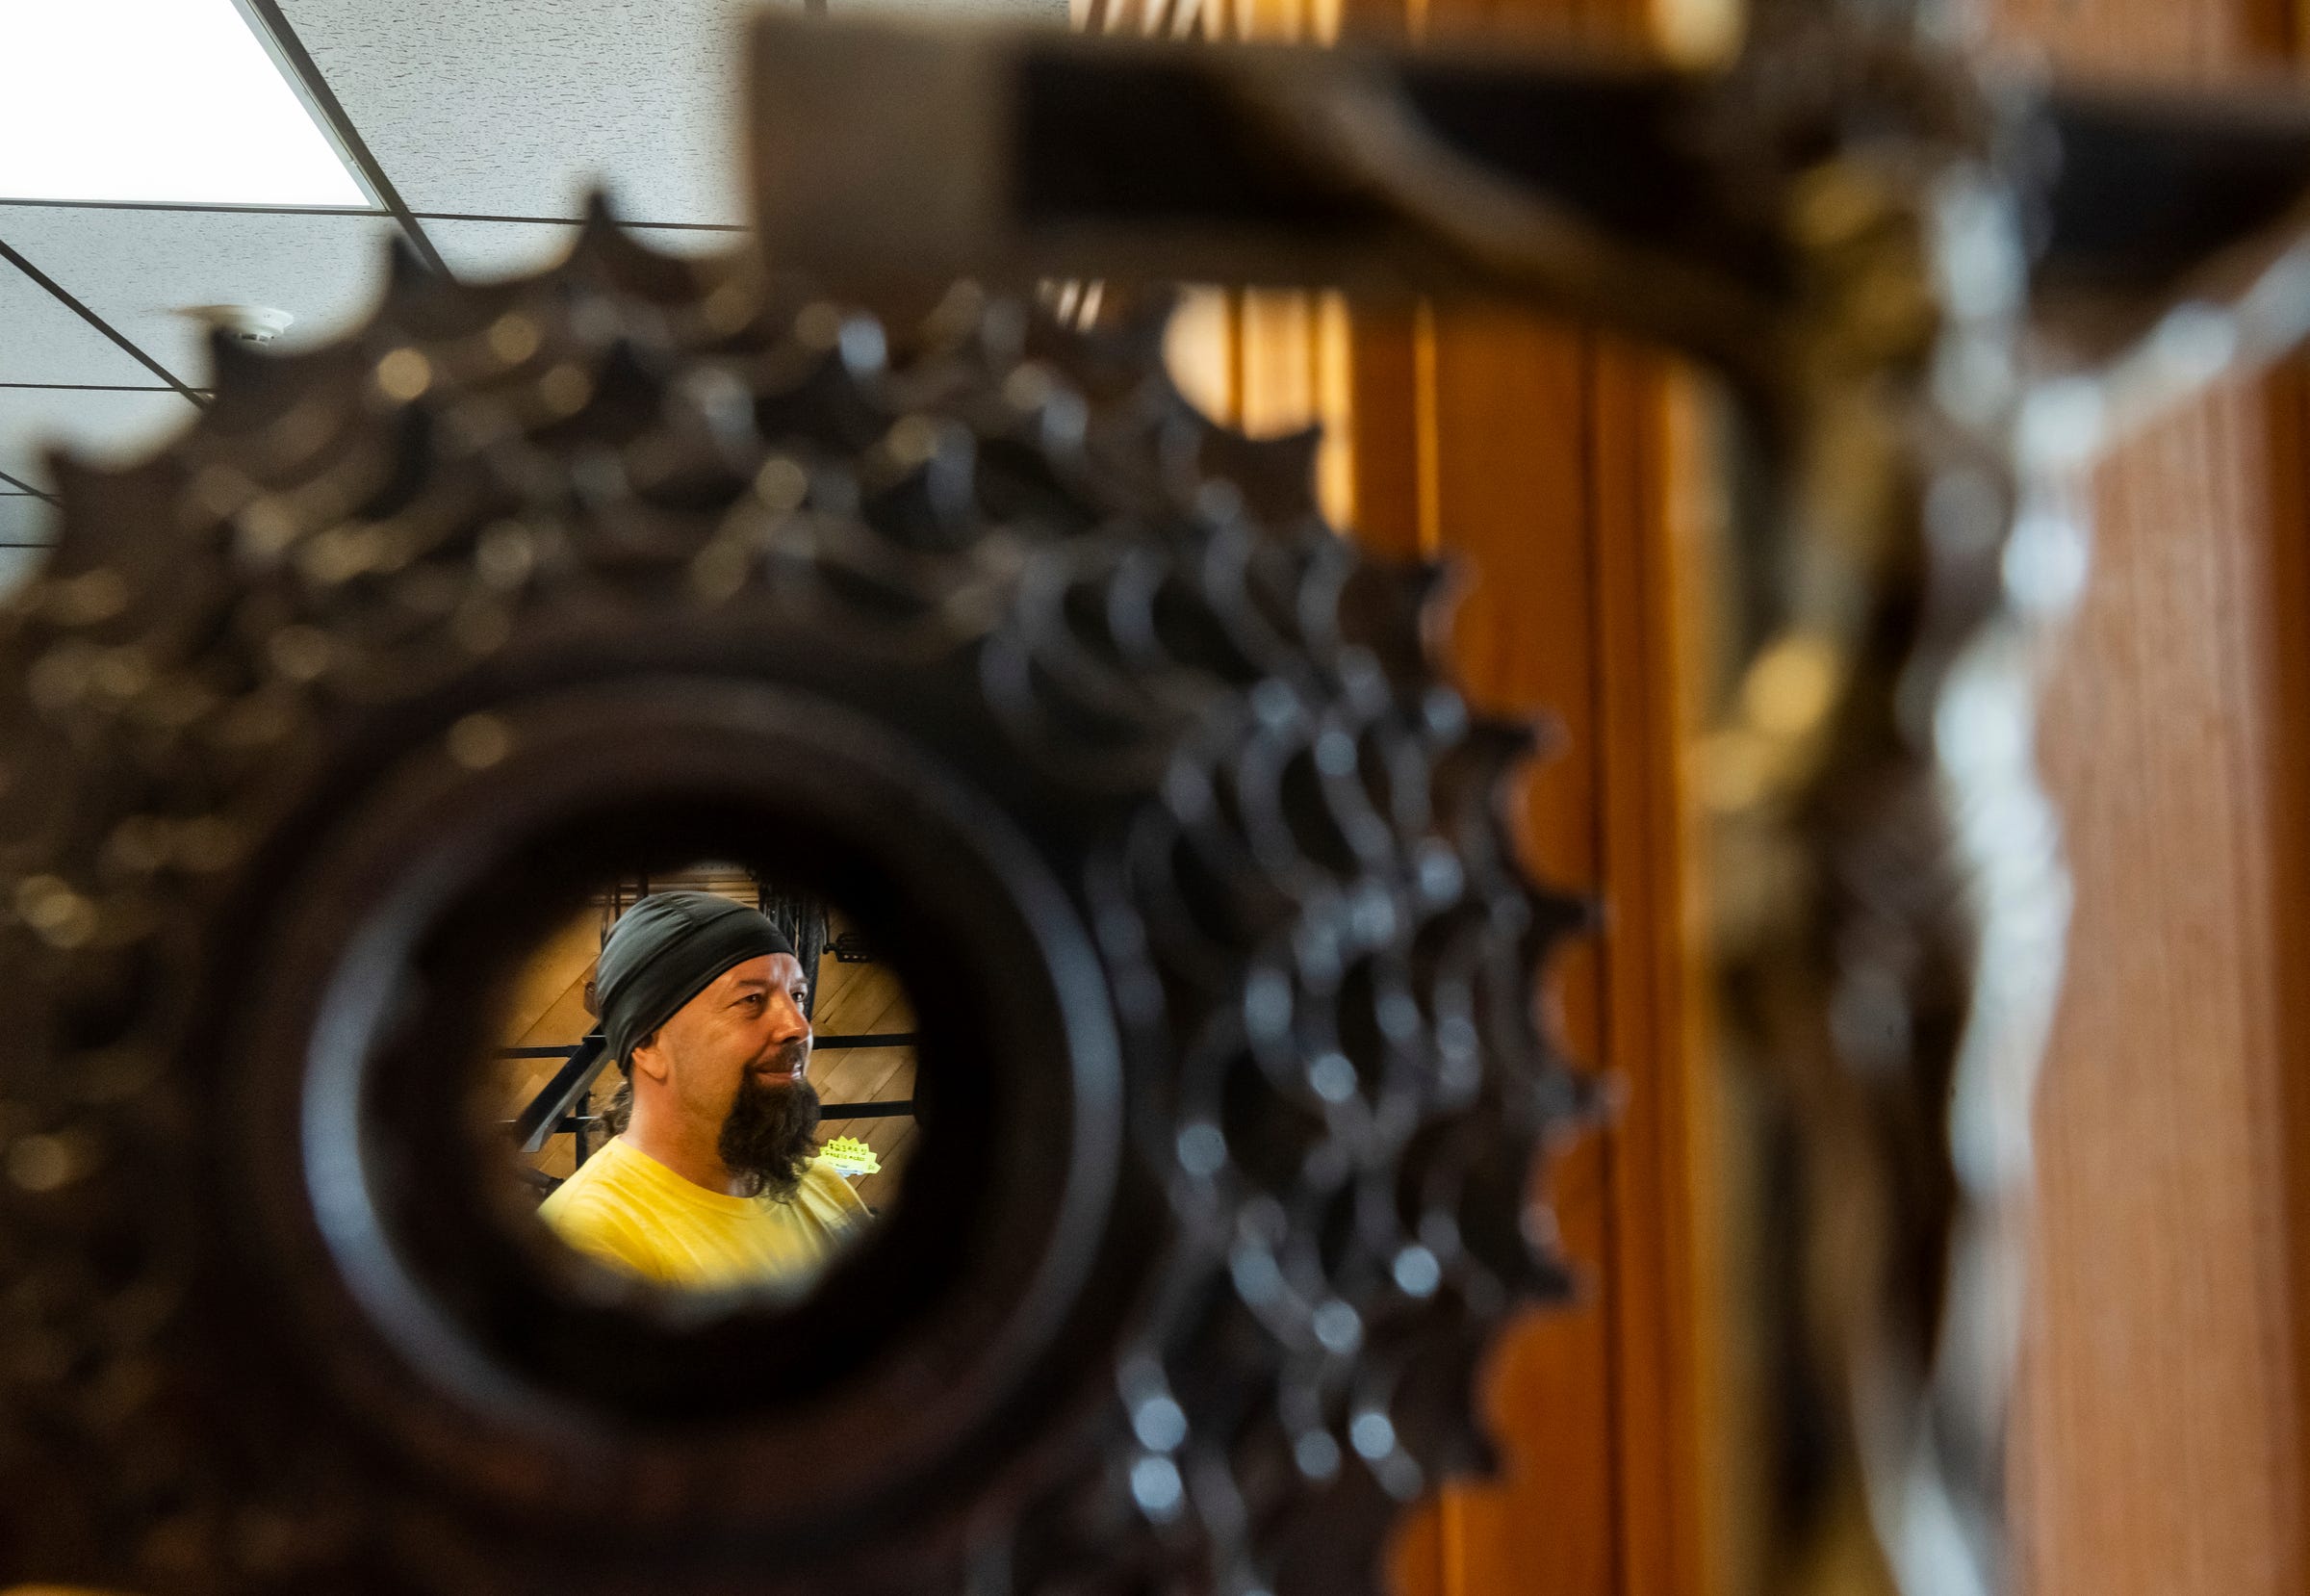 Steven Pringle, 57,owner of Build a Bicycle - Bicycle Therapy, is seen through a bicycle gear at his bike shop in Kingsford on Friday, July 29, 2022, in Michigan's Upper Peninsula.